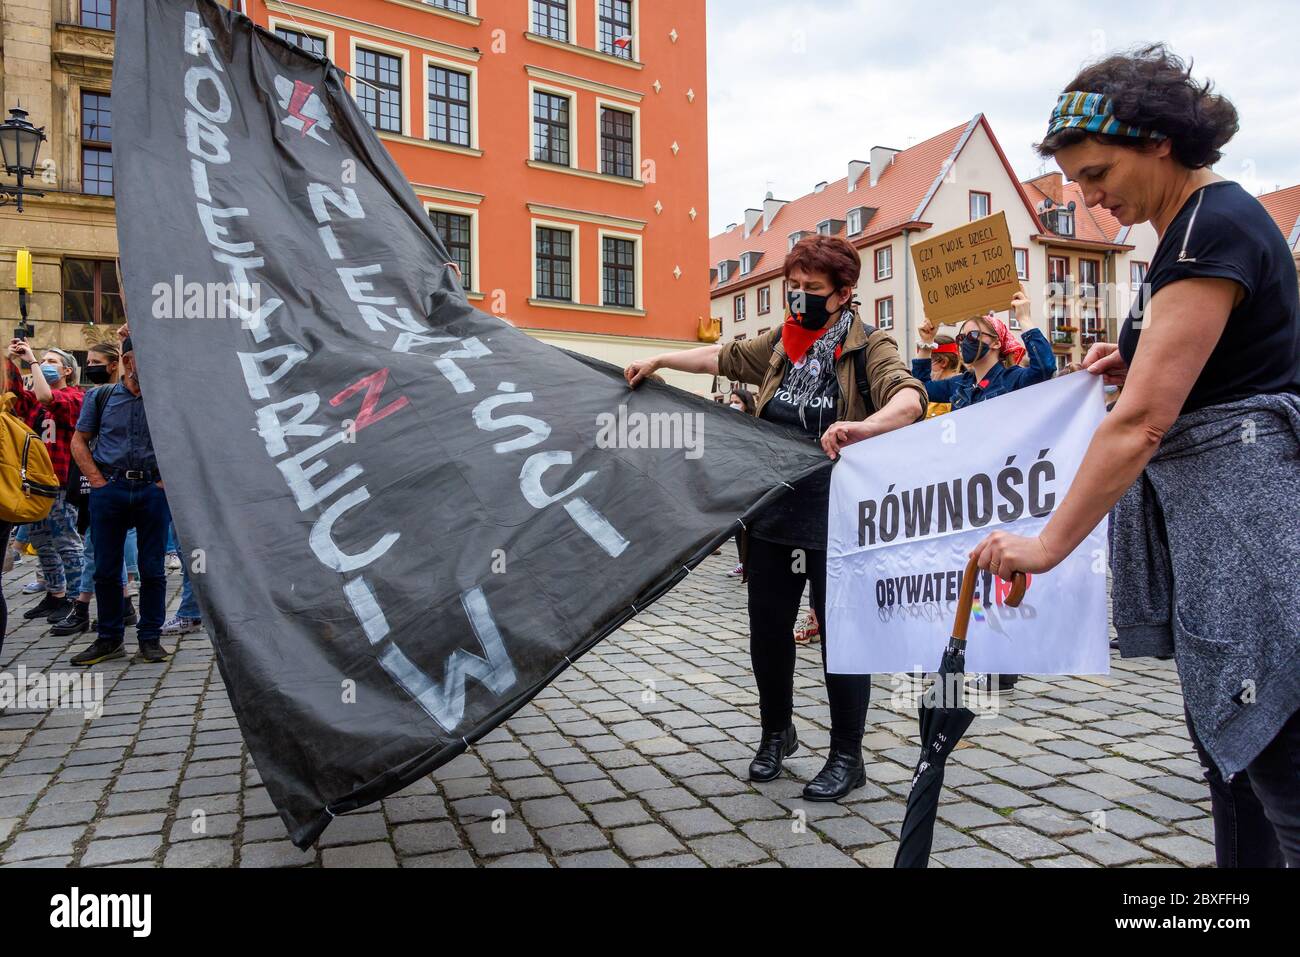 Wroclaw, Poland, 06.06.2020 - Feminists with poster 'women against hate' on polish peaceful protest against racism and hatred in Wroclaw city. Stock Photo